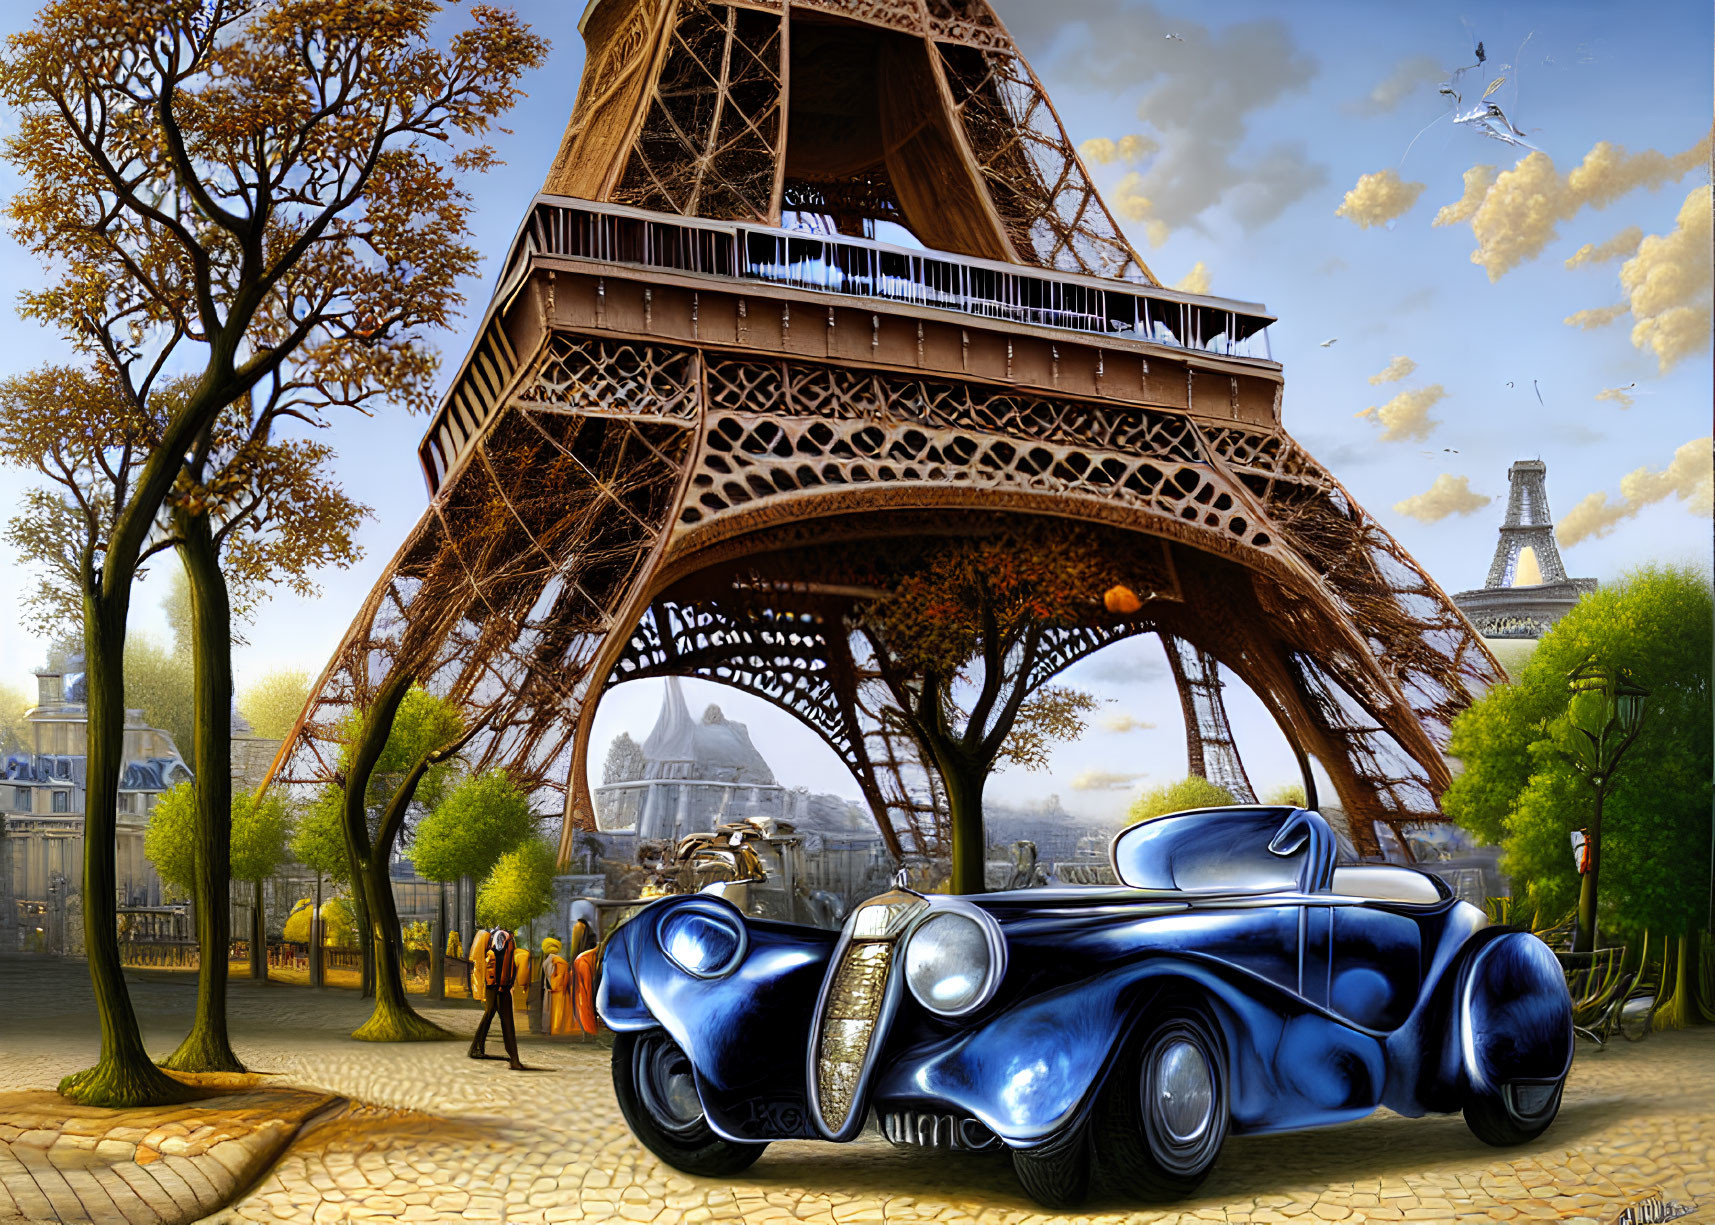 Eiffel Tower painting with vintage car in autumn landscape